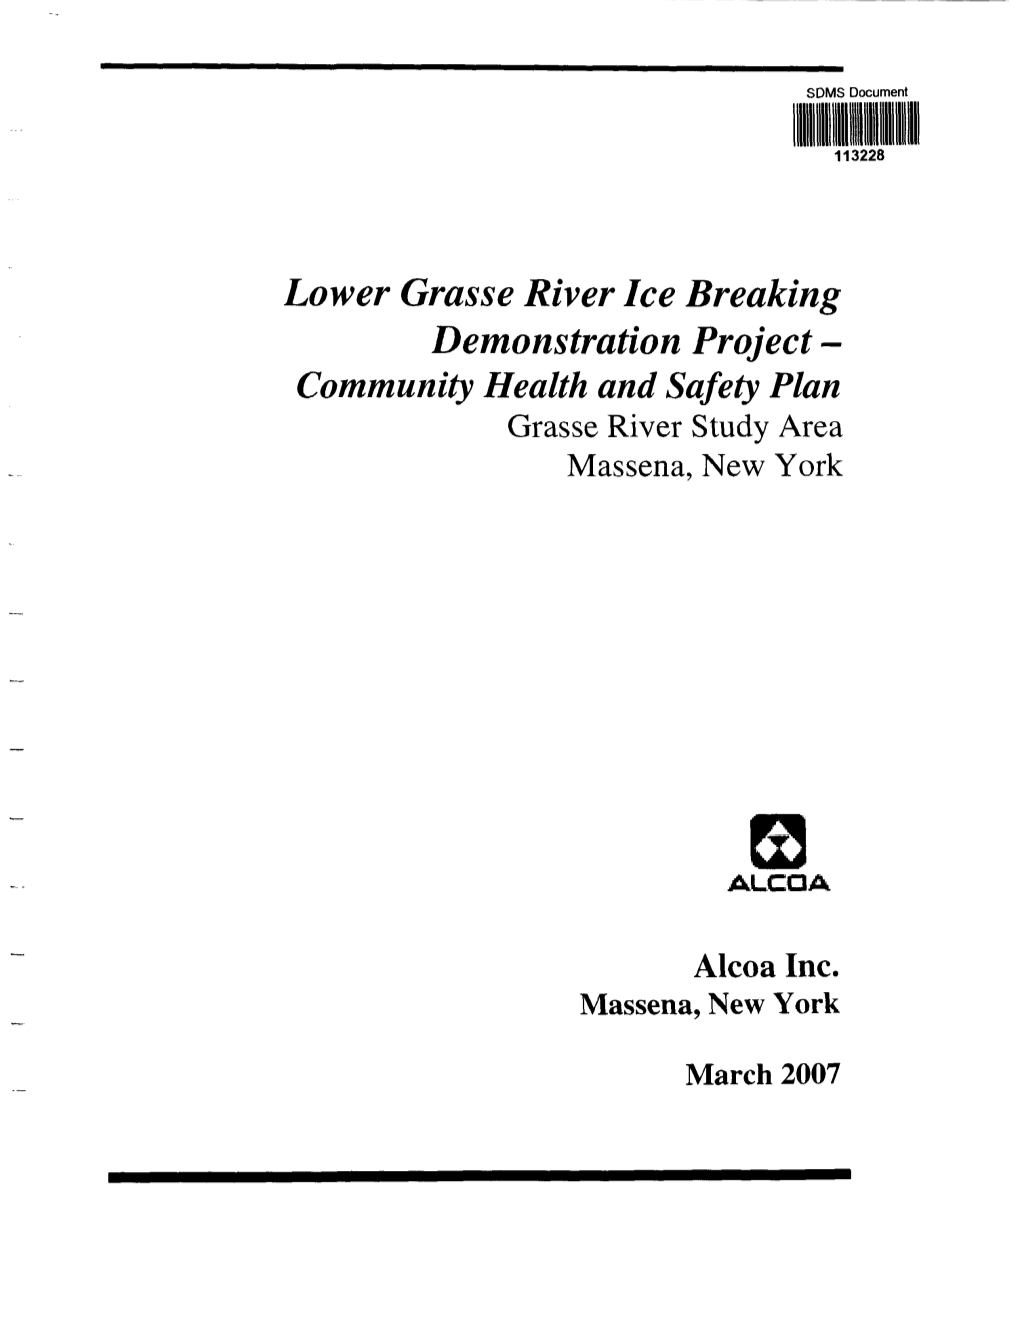 Lower Grasse River Ice Breaking Demonstration Project - Community Health and Safety Plan Grasse River Study Area Massena, New York